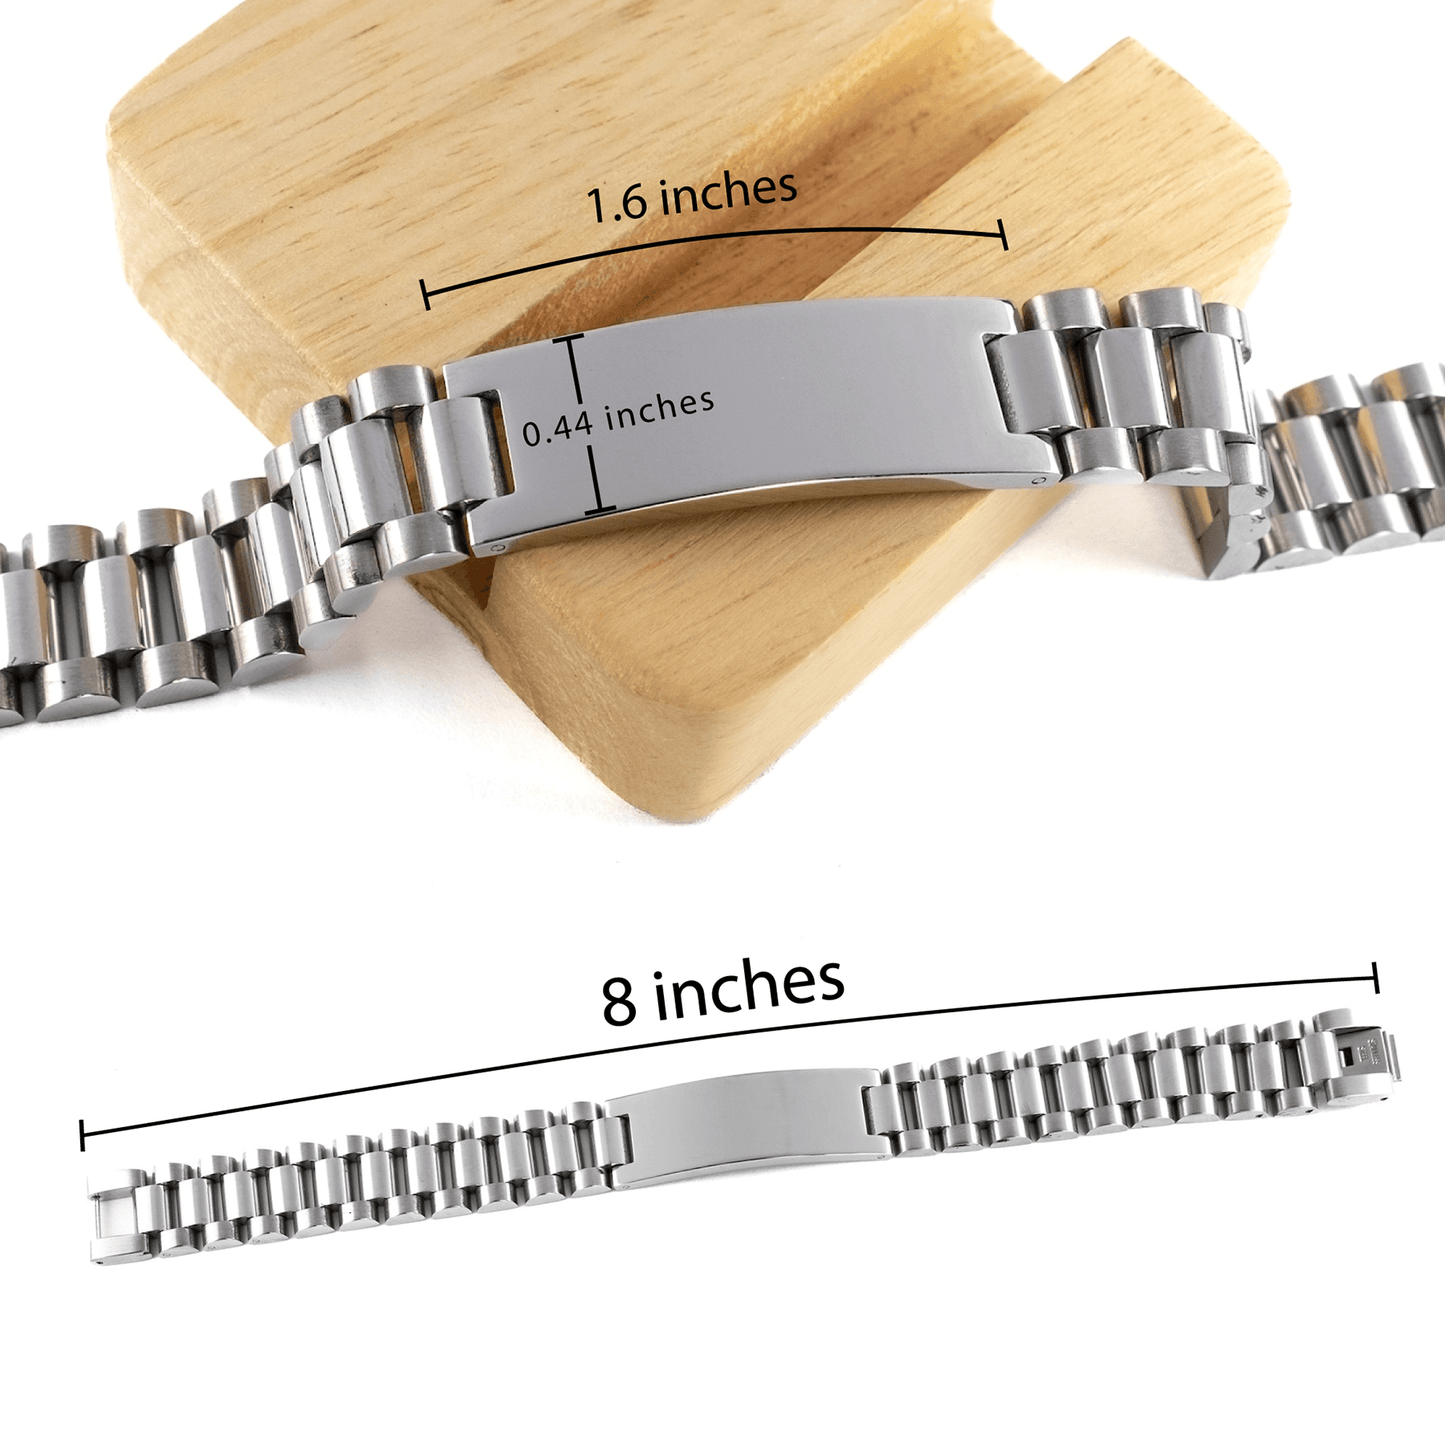 Remarkable Marketing Manager Gifts, Your dedication and hard work, Inspirational Birthday Christmas Unique Ladder Stainless Steel Bracelet For Marketing Manager, Coworkers, Men, Women, Friends - Mallard Moon Gift Shop